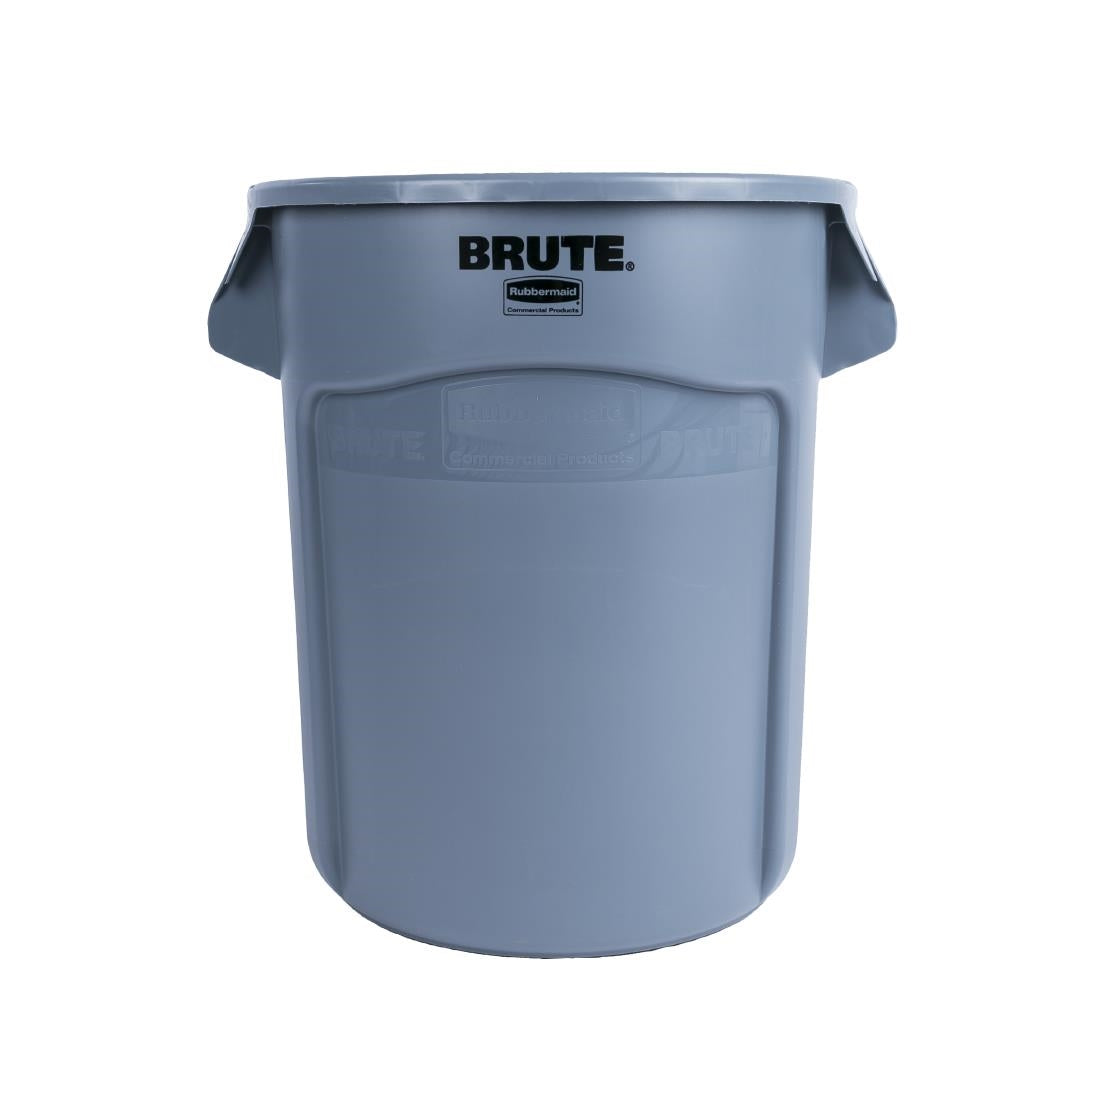 L638 Rubbermaid Brute Utility Container 75.7Ltr Grey JD Catering Equipment Solutions Ltd